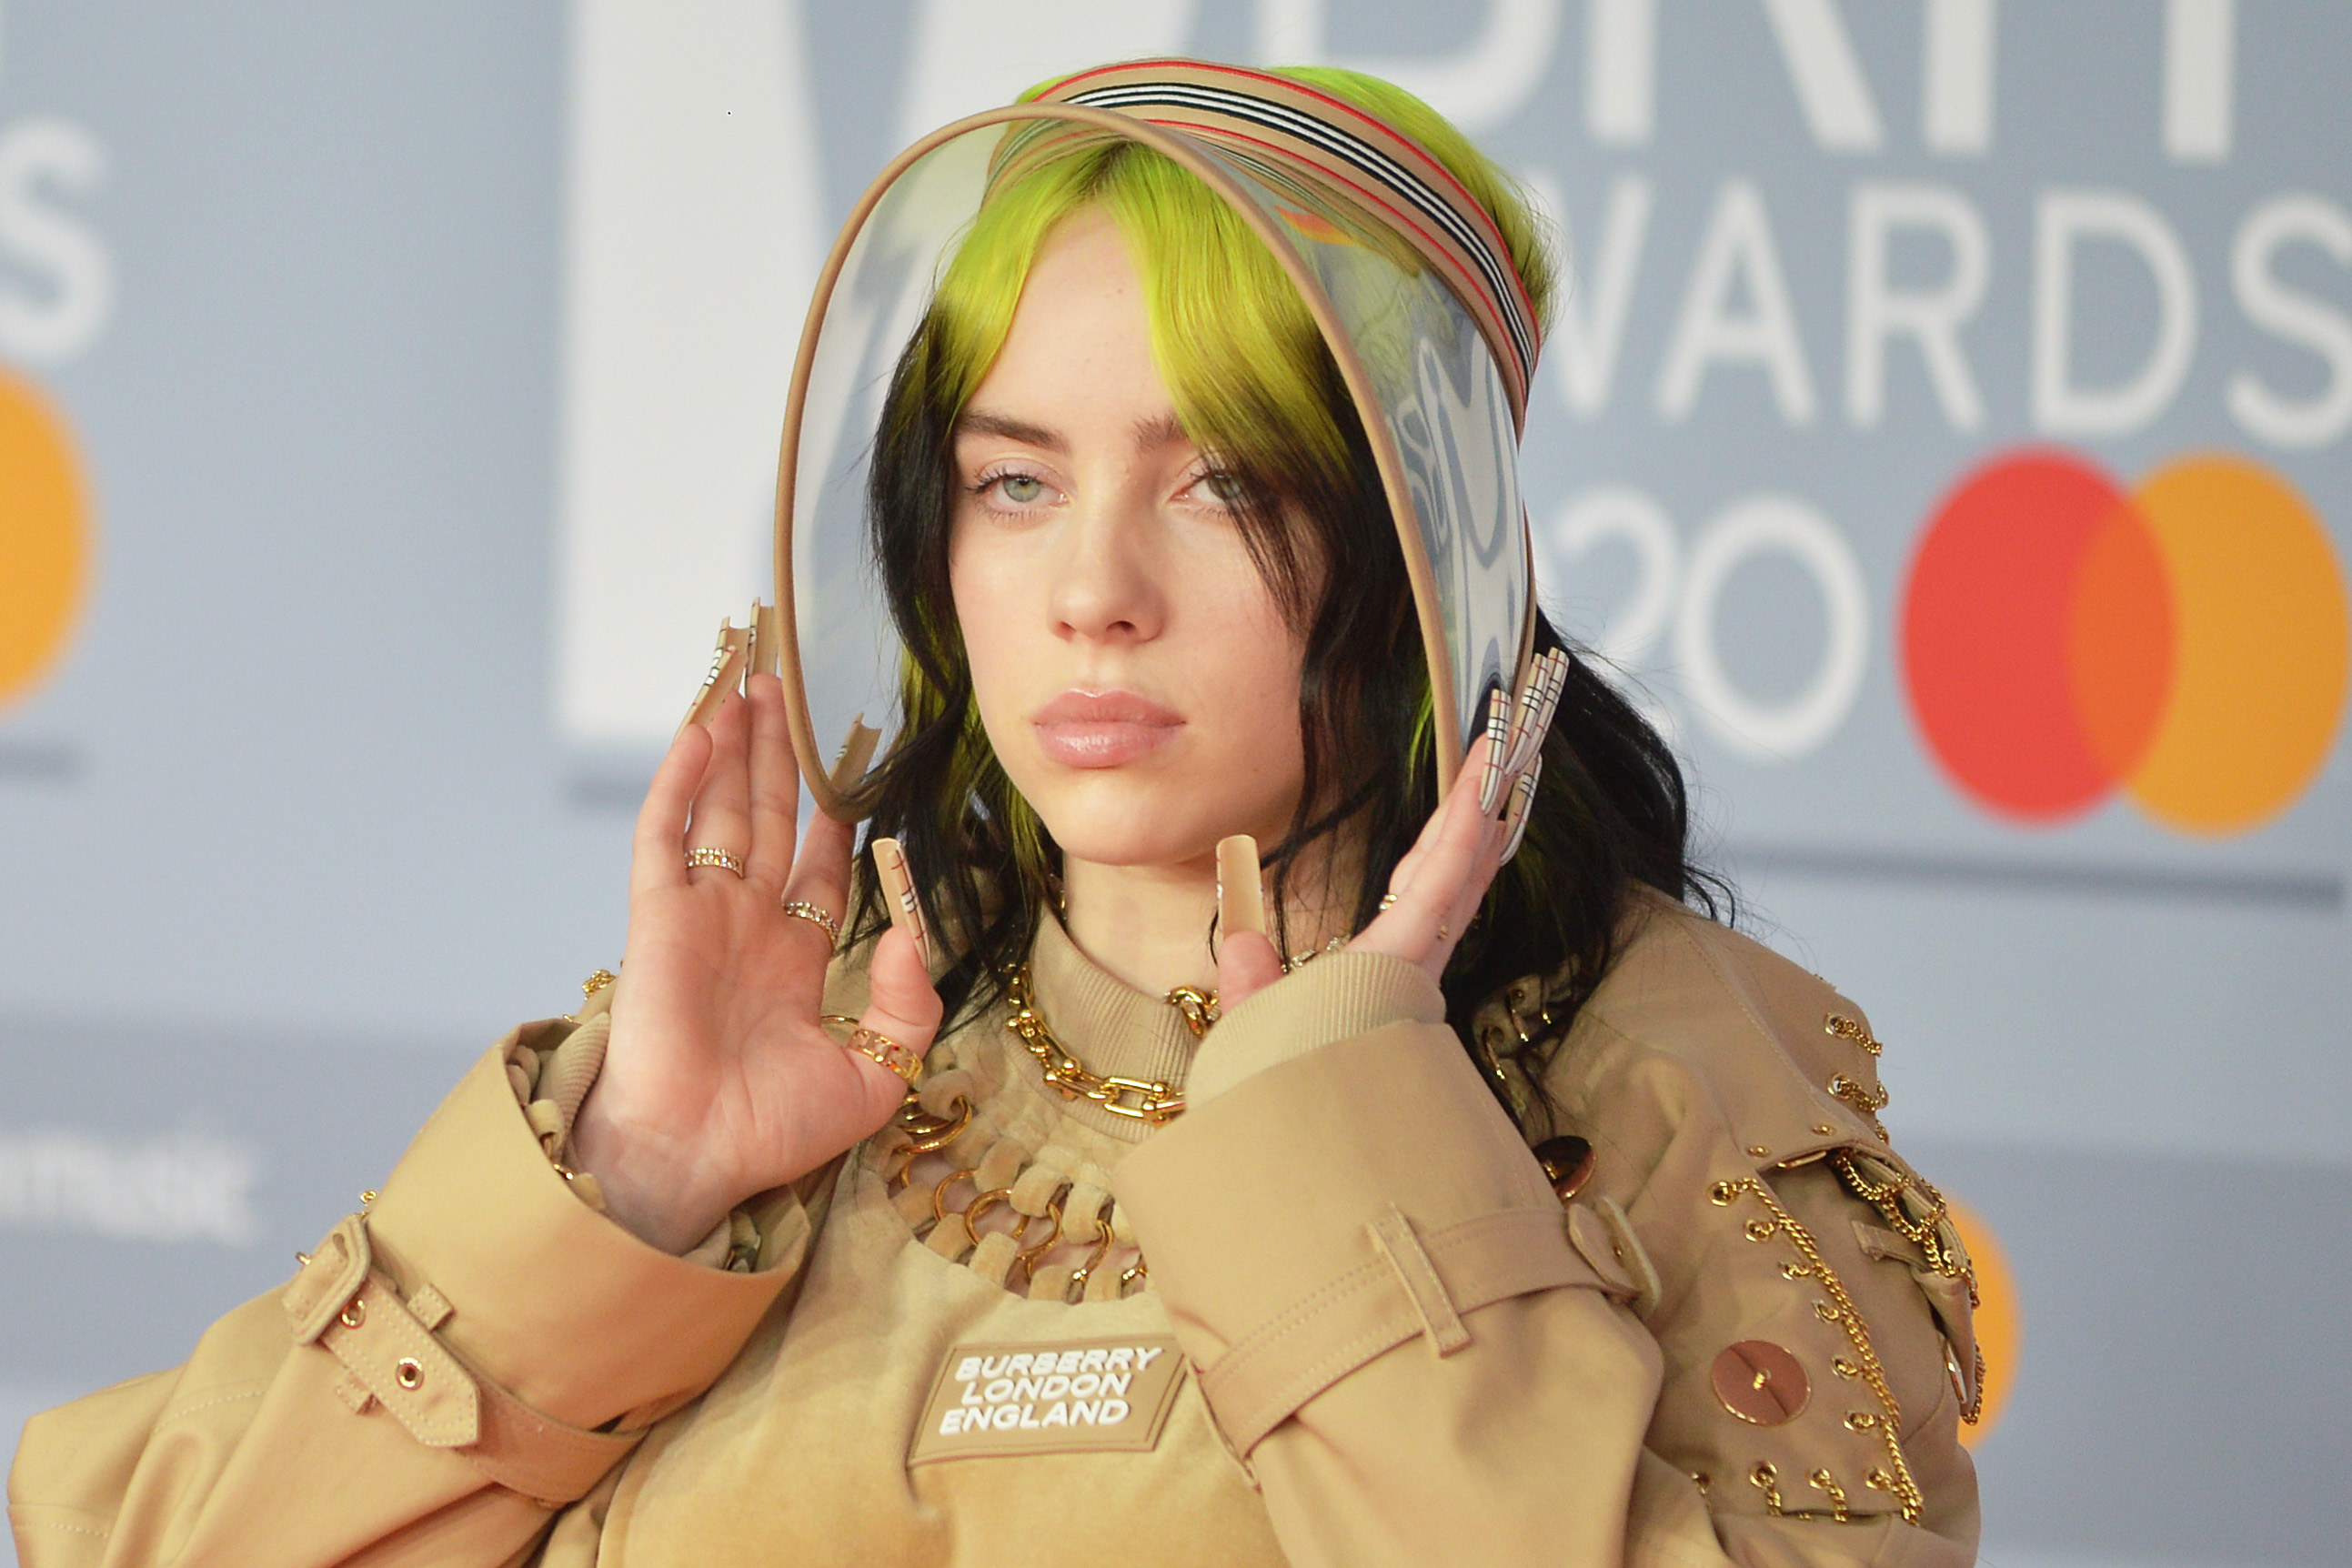 Billie Eilish is photographed at The BRIT Awards in 2020